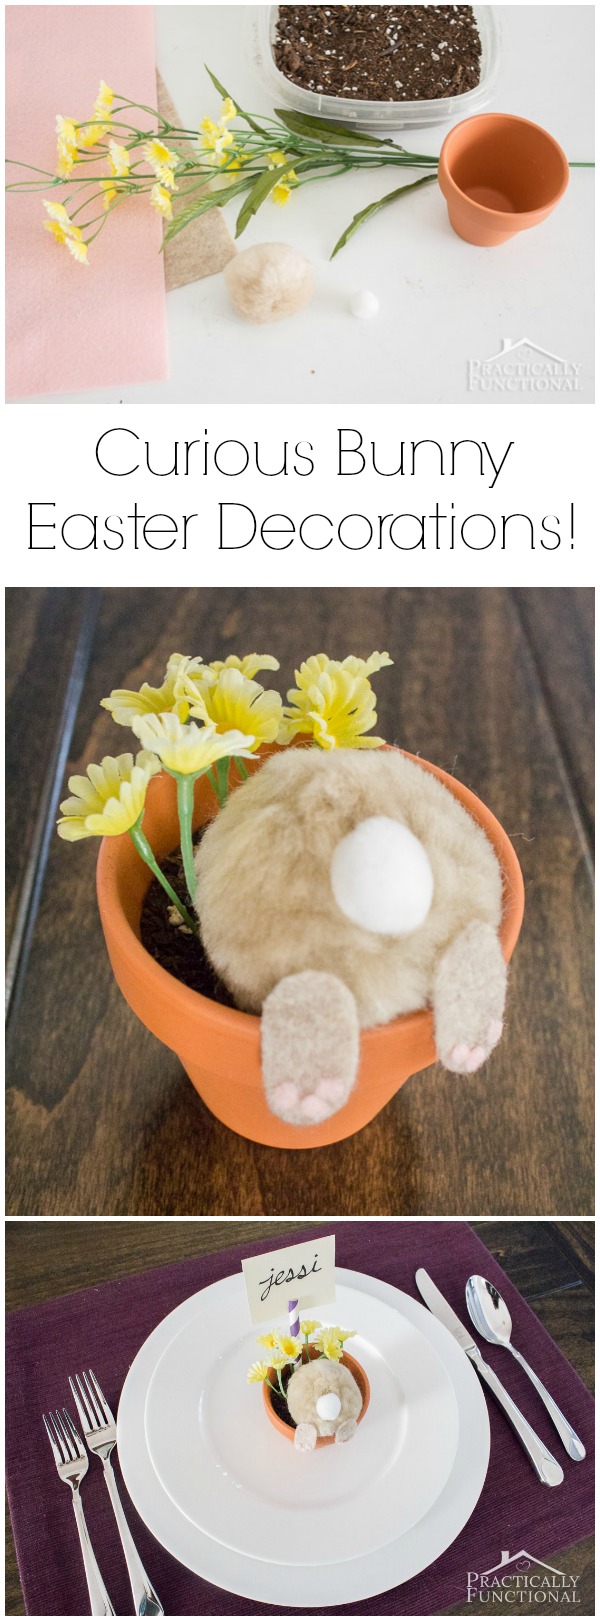 Turn a few cotton balls and felt into a curious little bunny; perfect Easter decorations or table place cards!